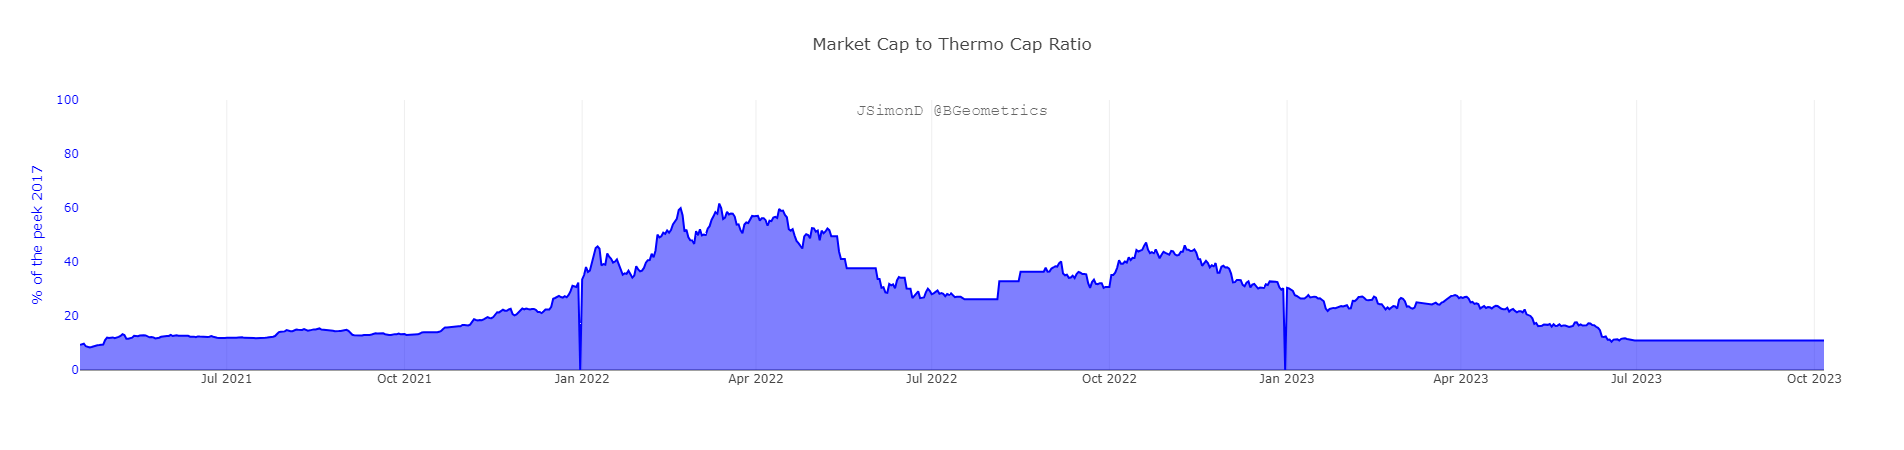 Bitcoin - Indicateurs on-chain - Market Cap to Thermo Cap